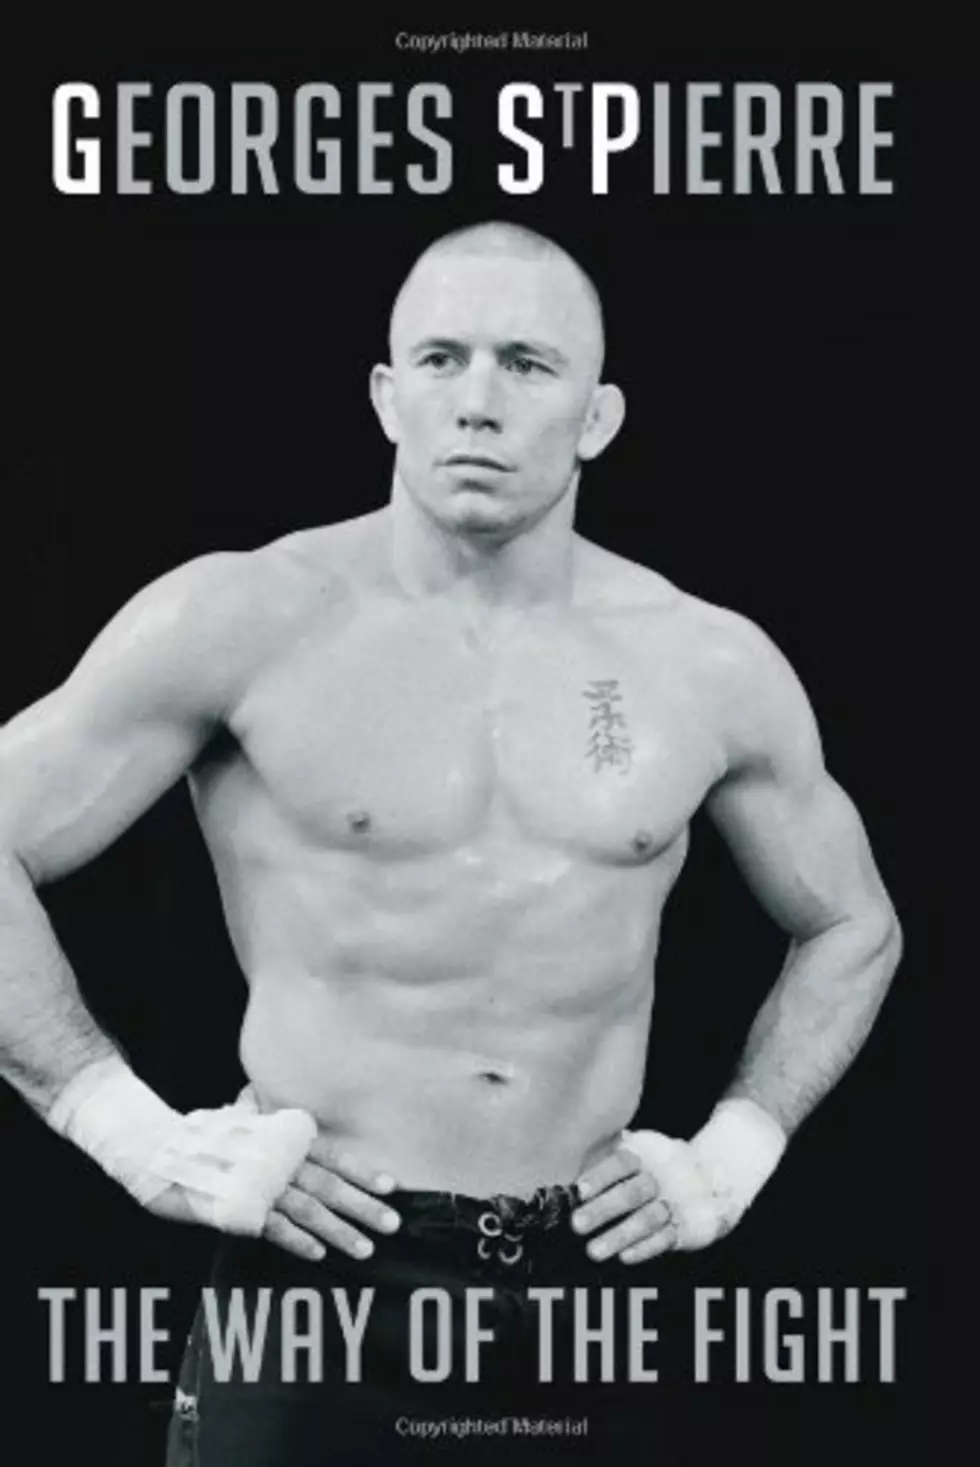 Hear My Interview with UFC Champ Georges St-Pierre [Audio]